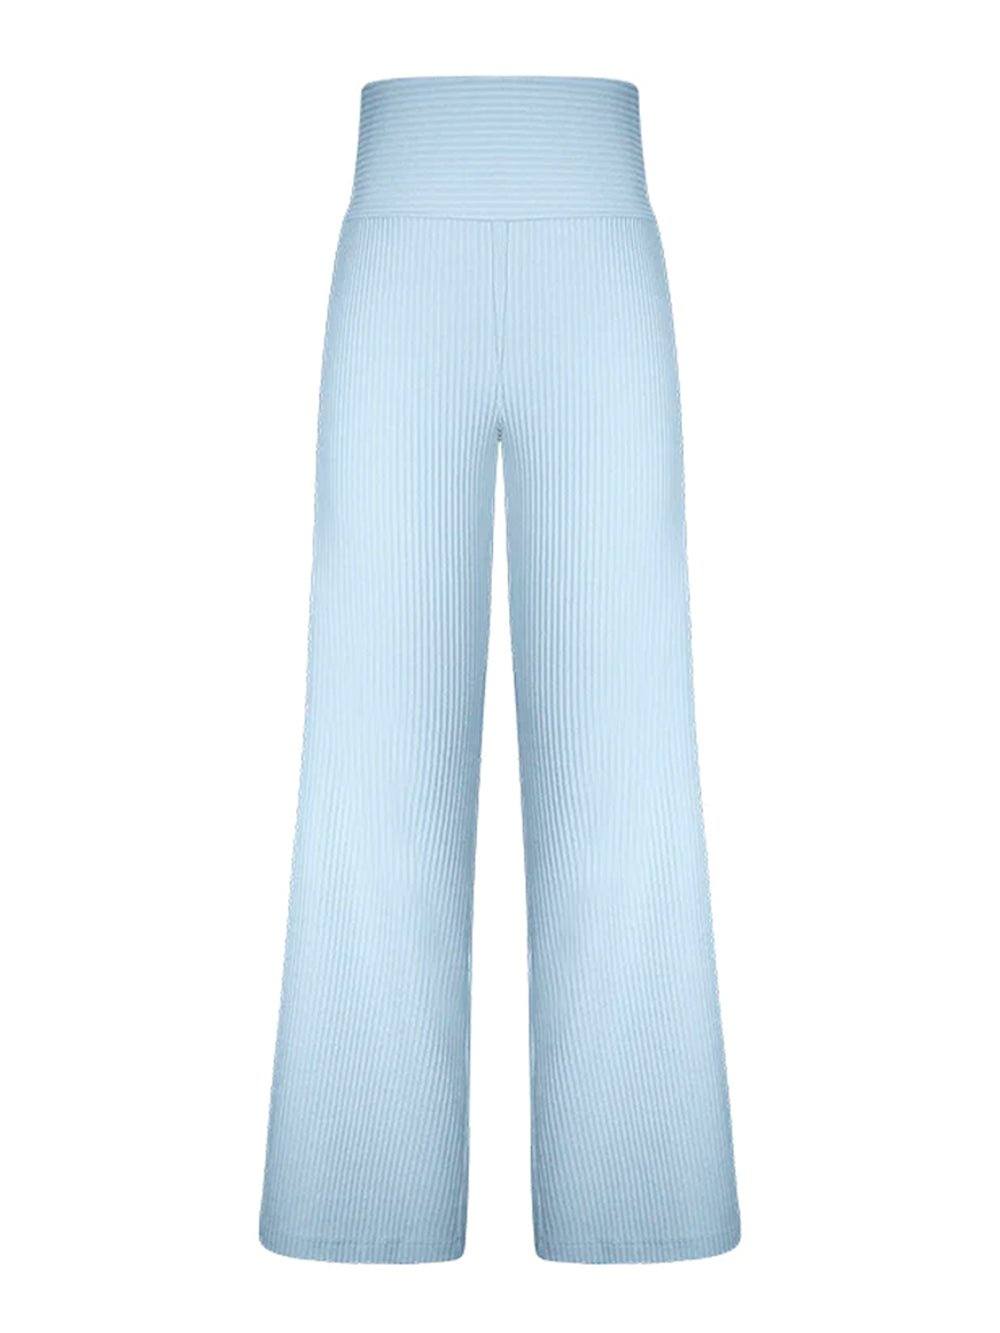 Straight Casual Pants - Baby Blue - OCEAN MYSTERY